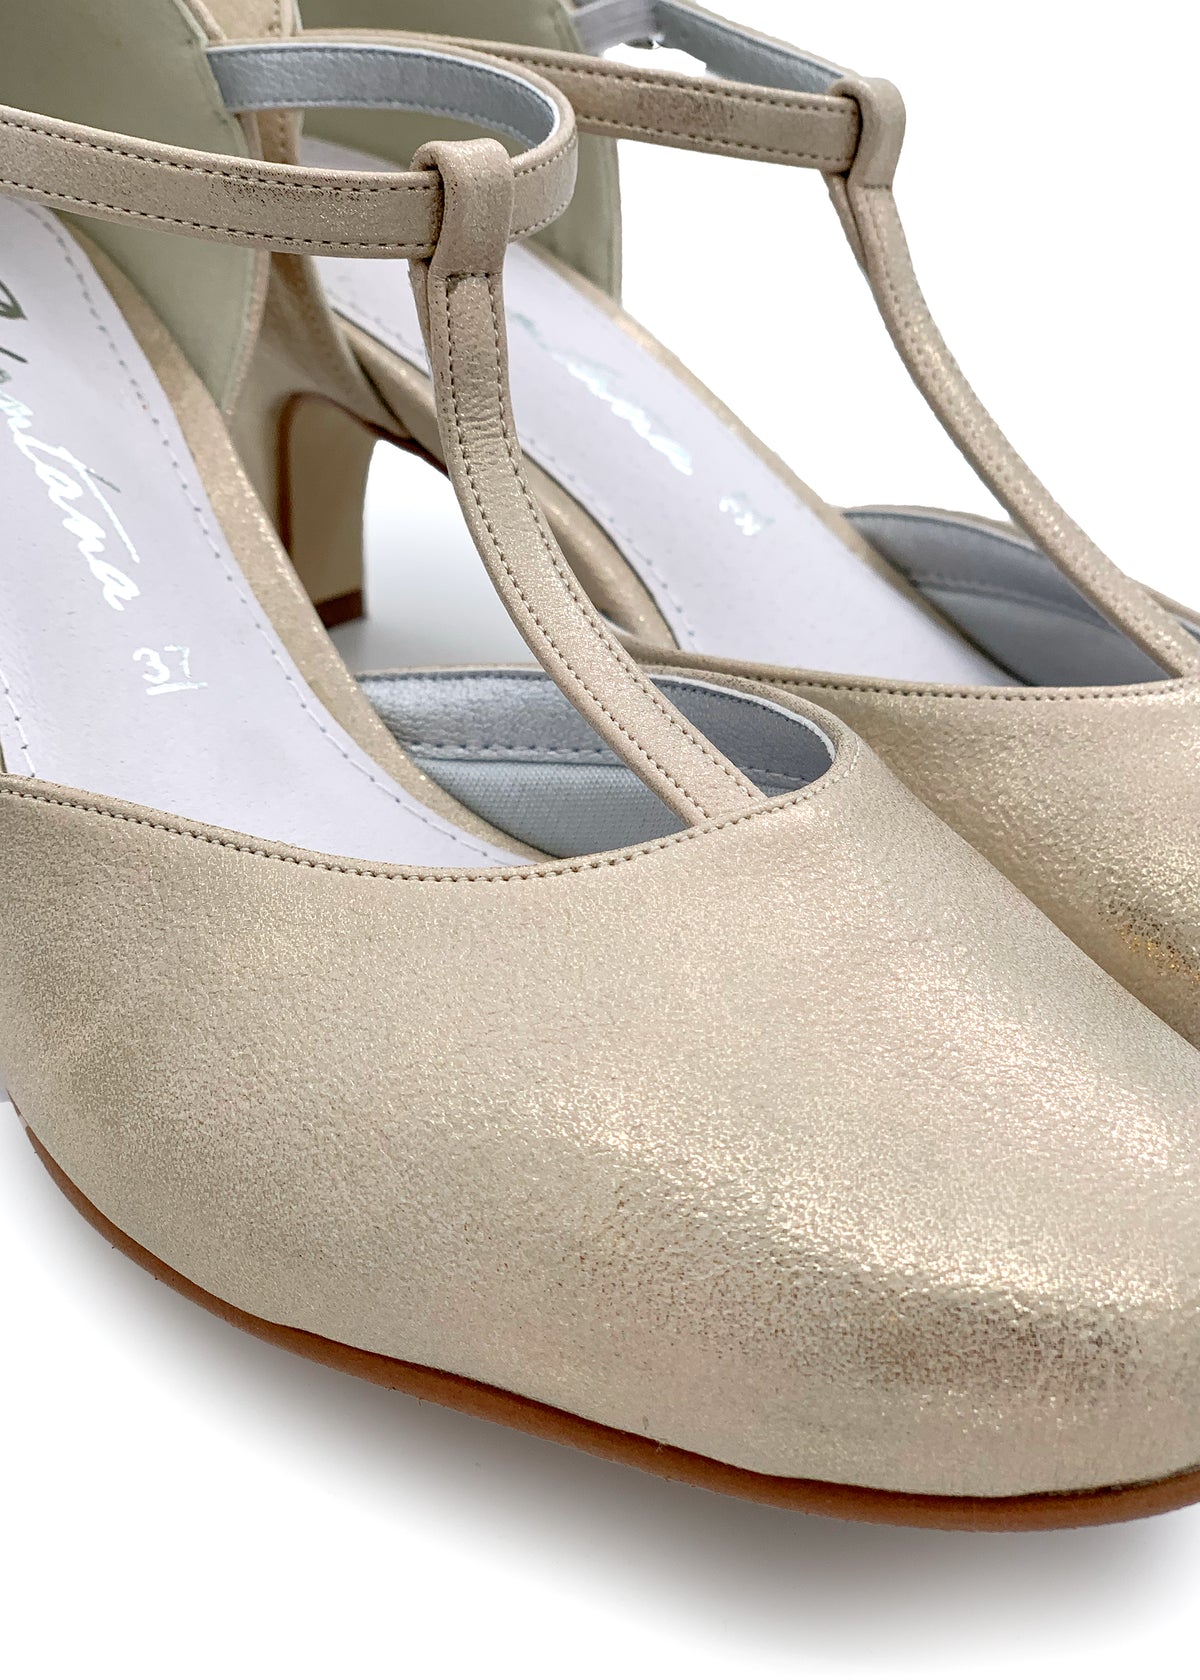 Open-toed shoes with ankle straps - sparkling gold